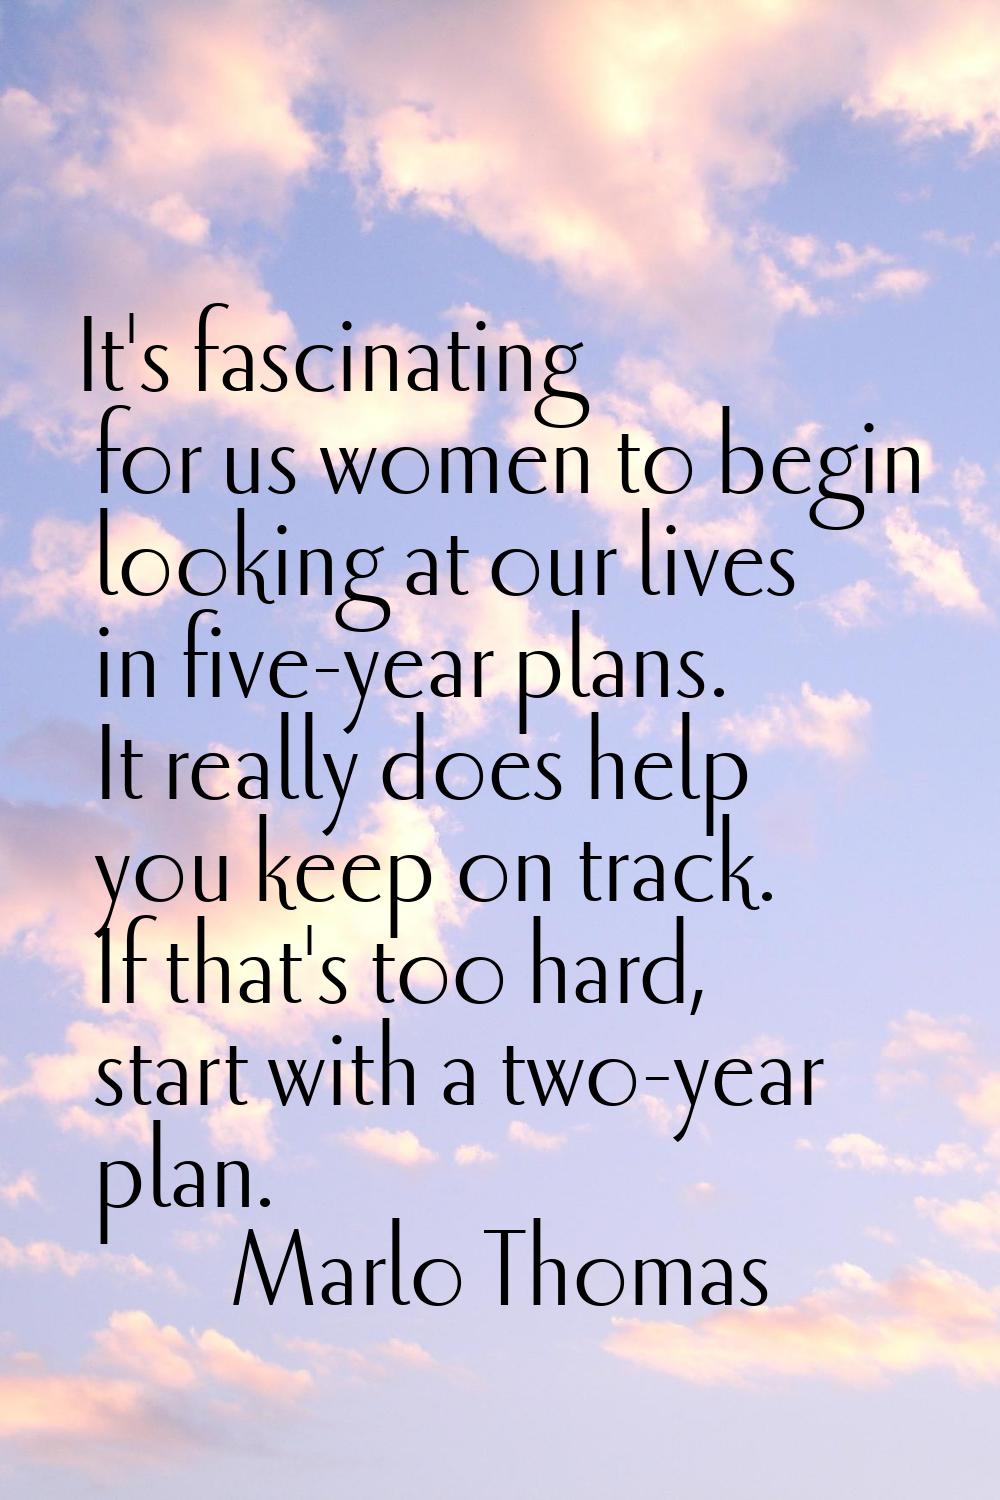 It's fascinating for us women to begin looking at our lives in five-year plans. It really does help